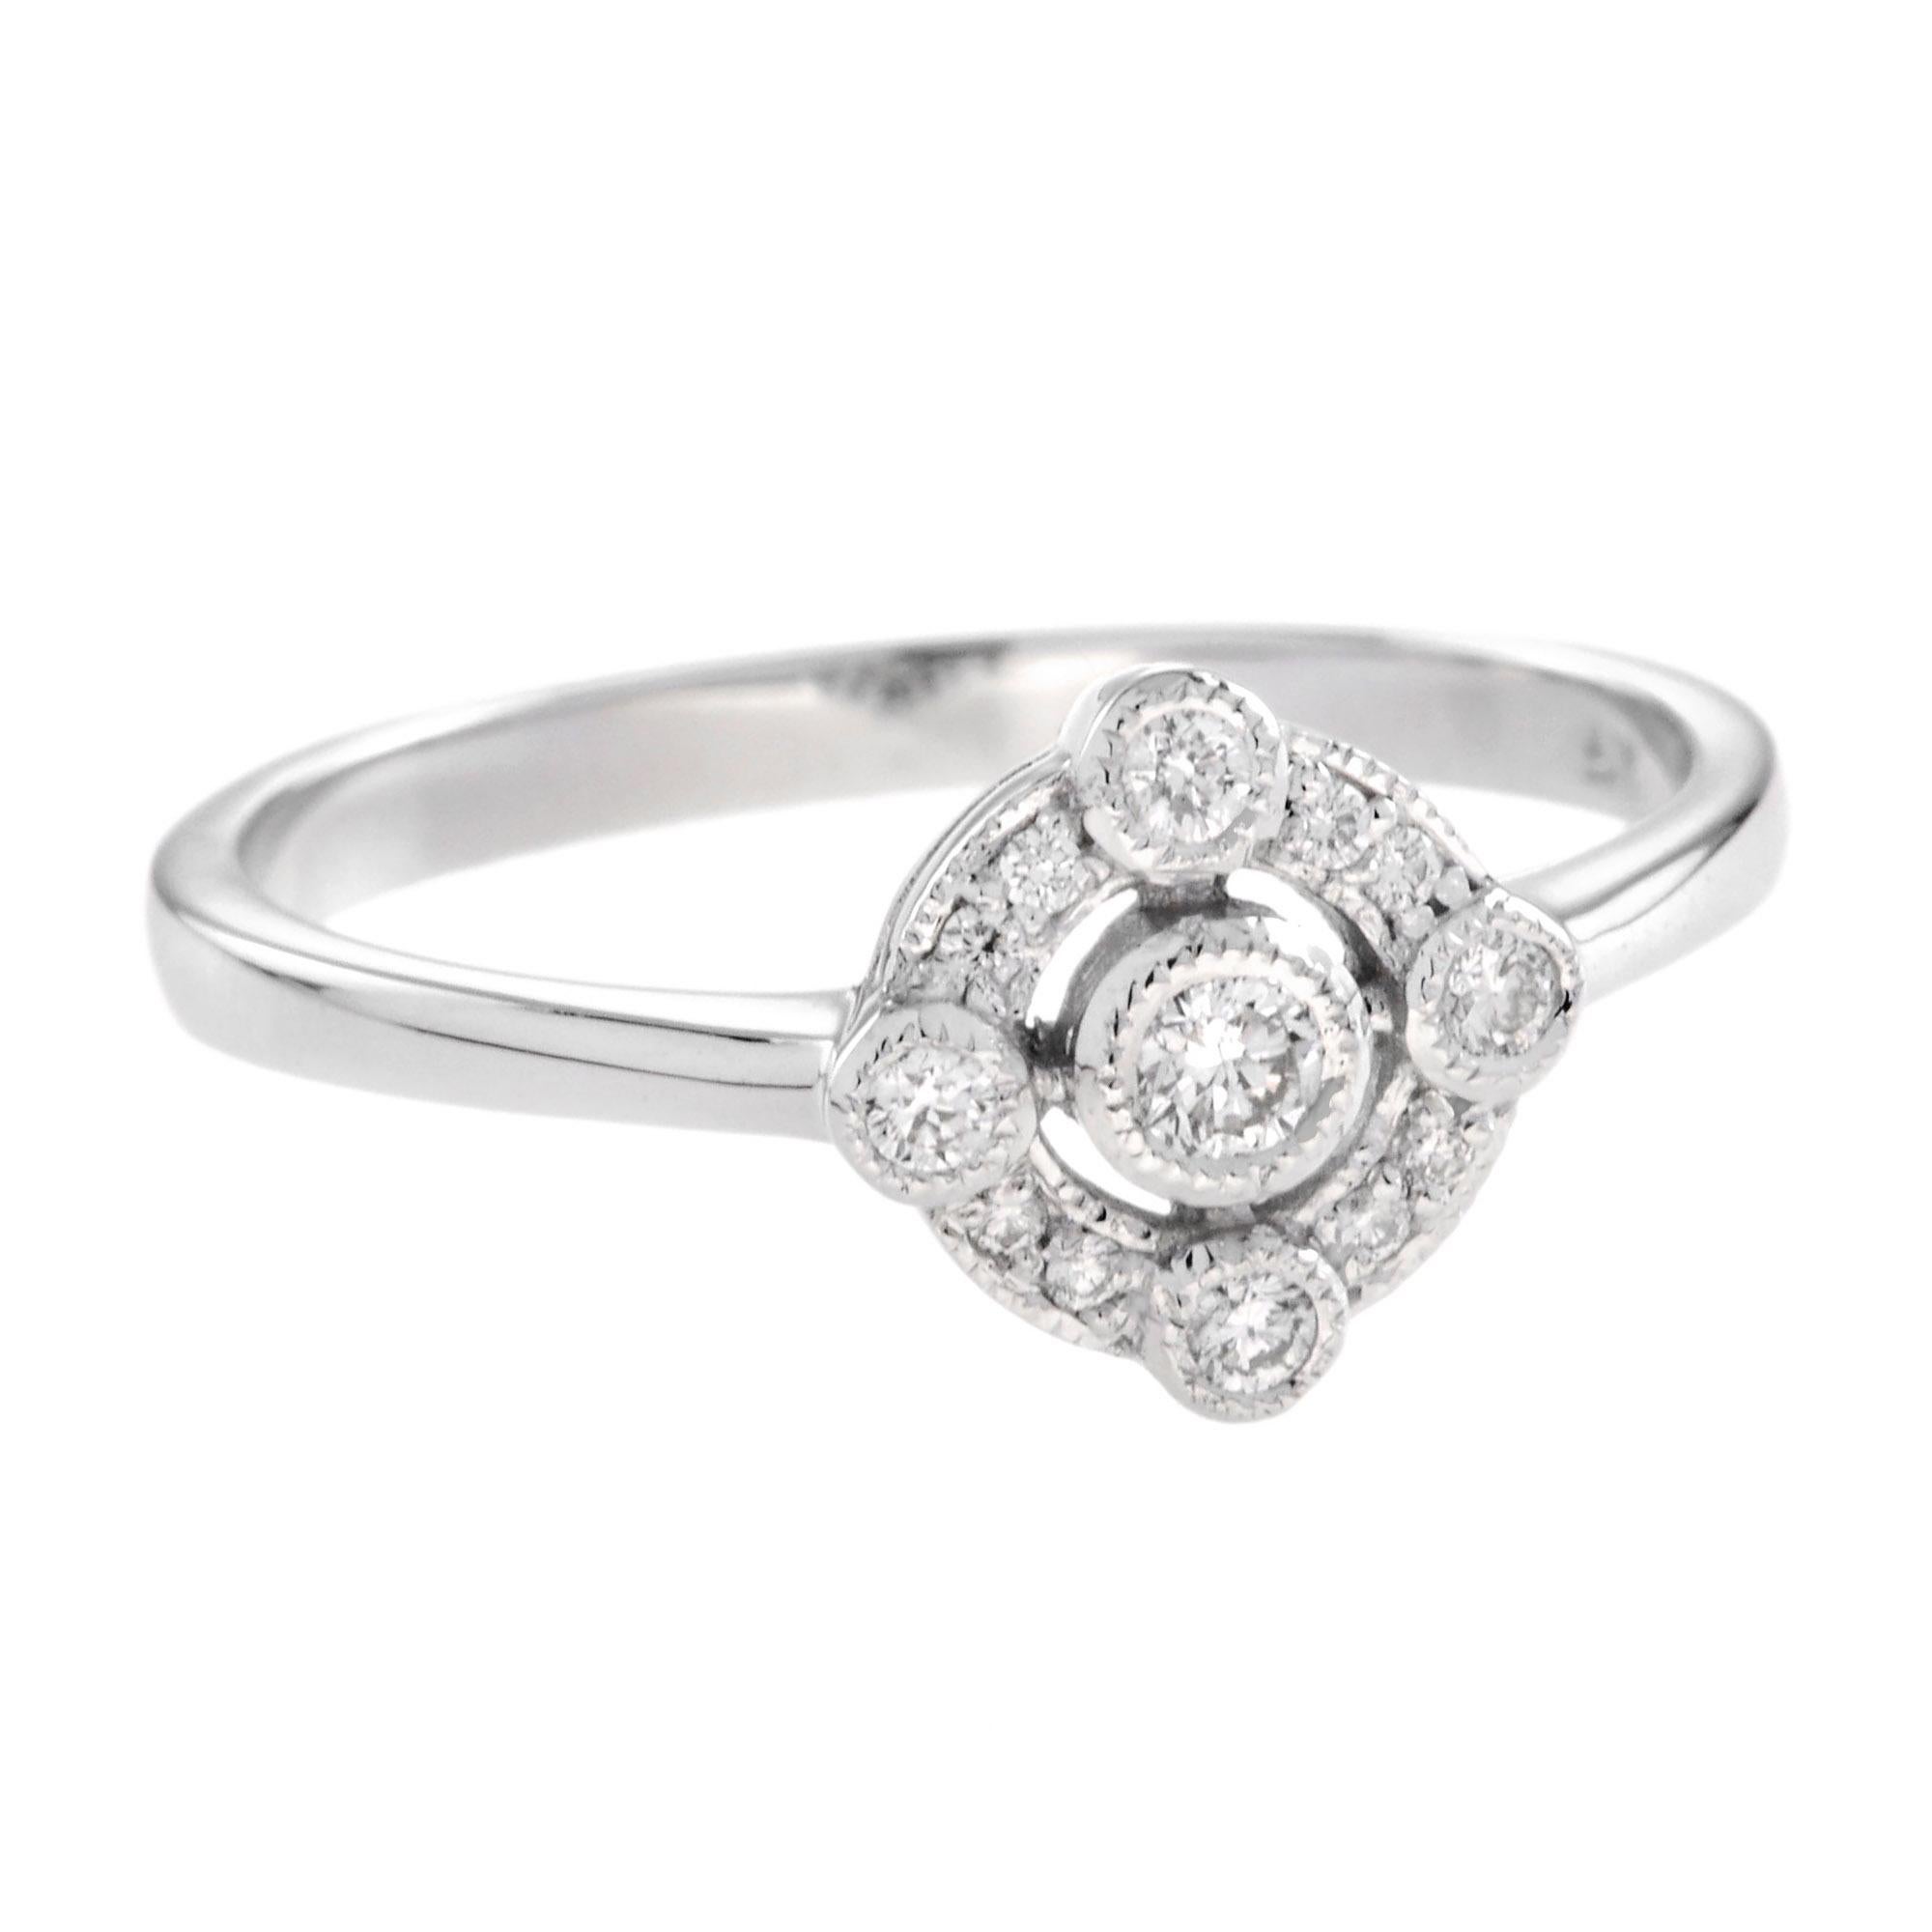 For Sale:  Art Deco Style Diamond Halo Ring in 14K White Gold 2